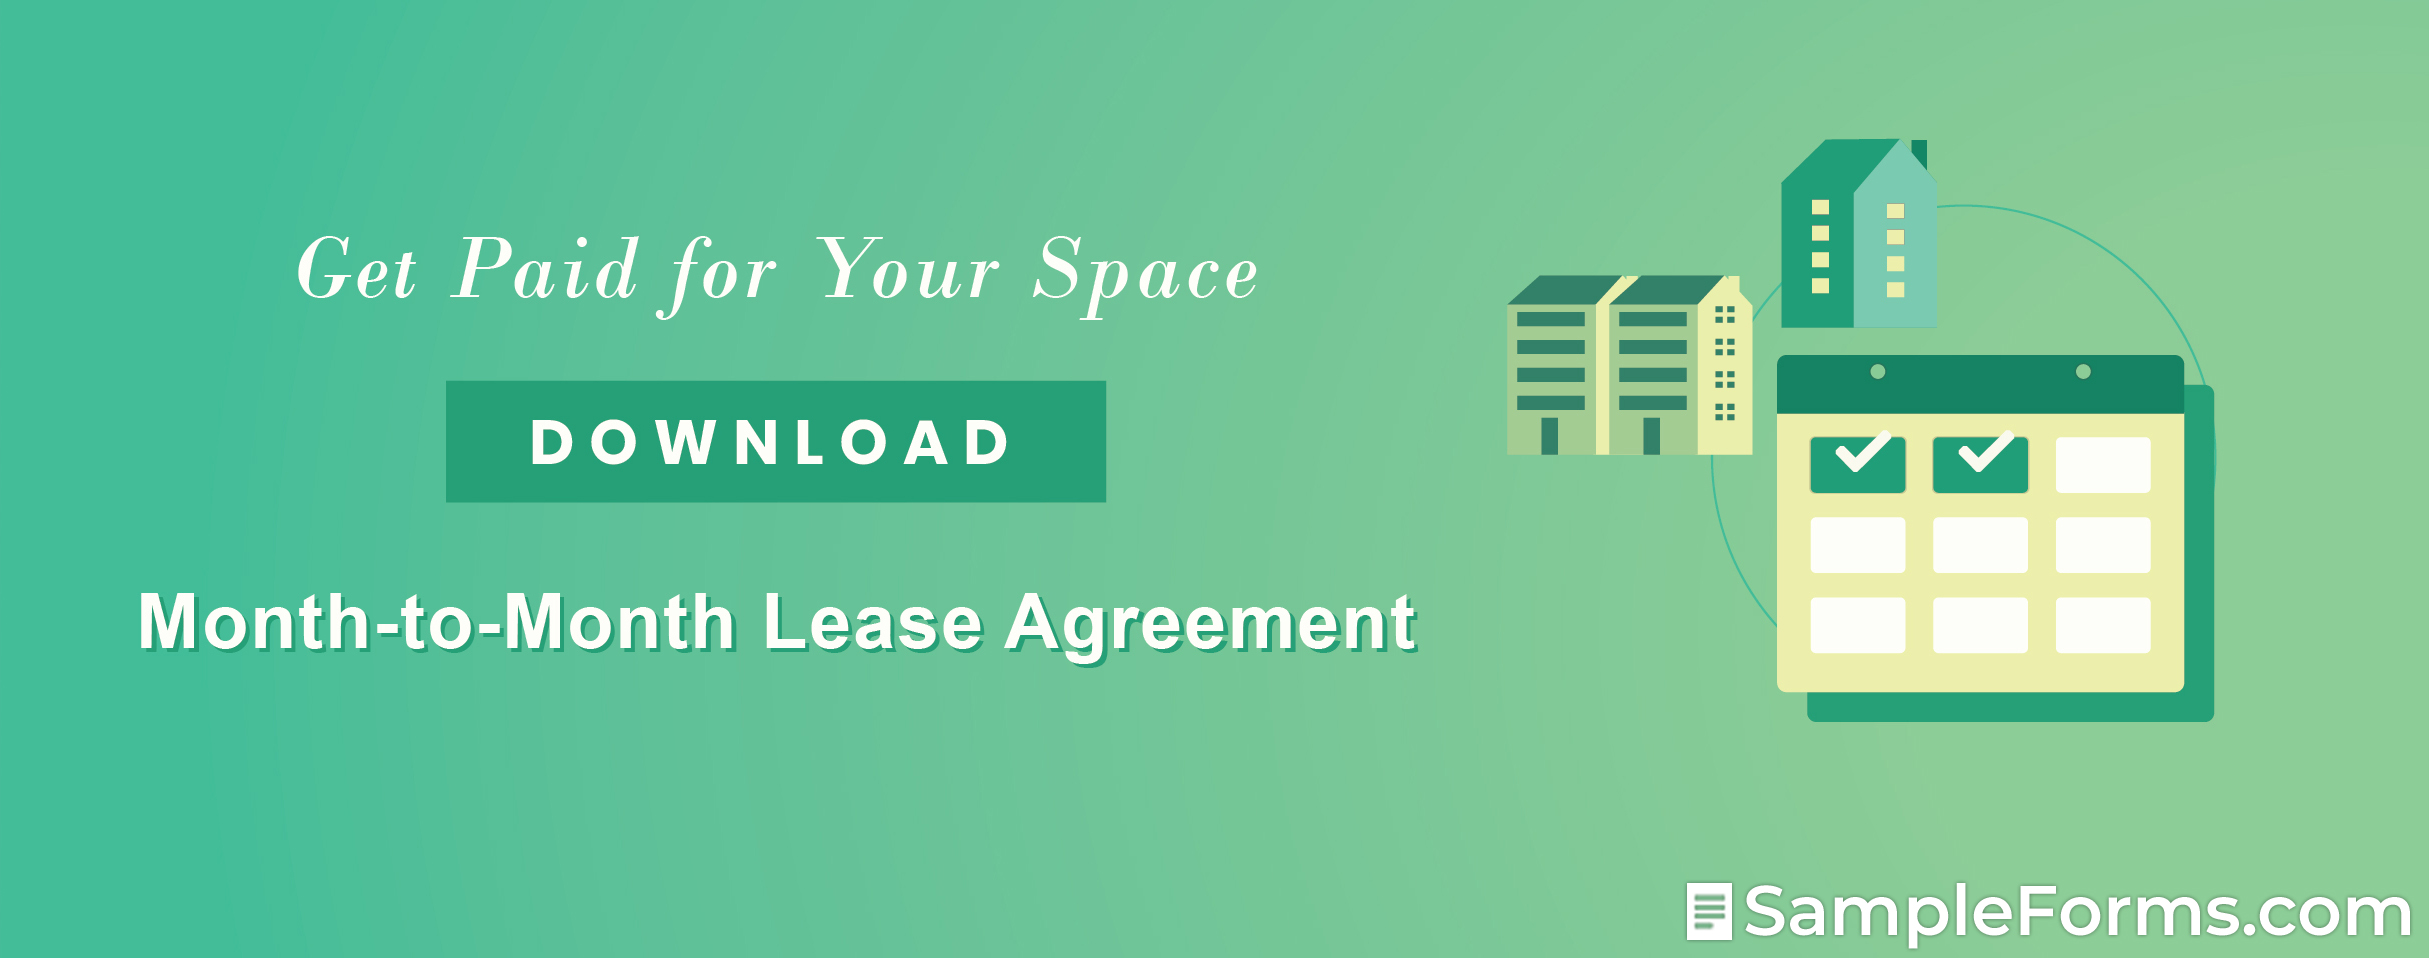 Month to Month Lease Agreement1